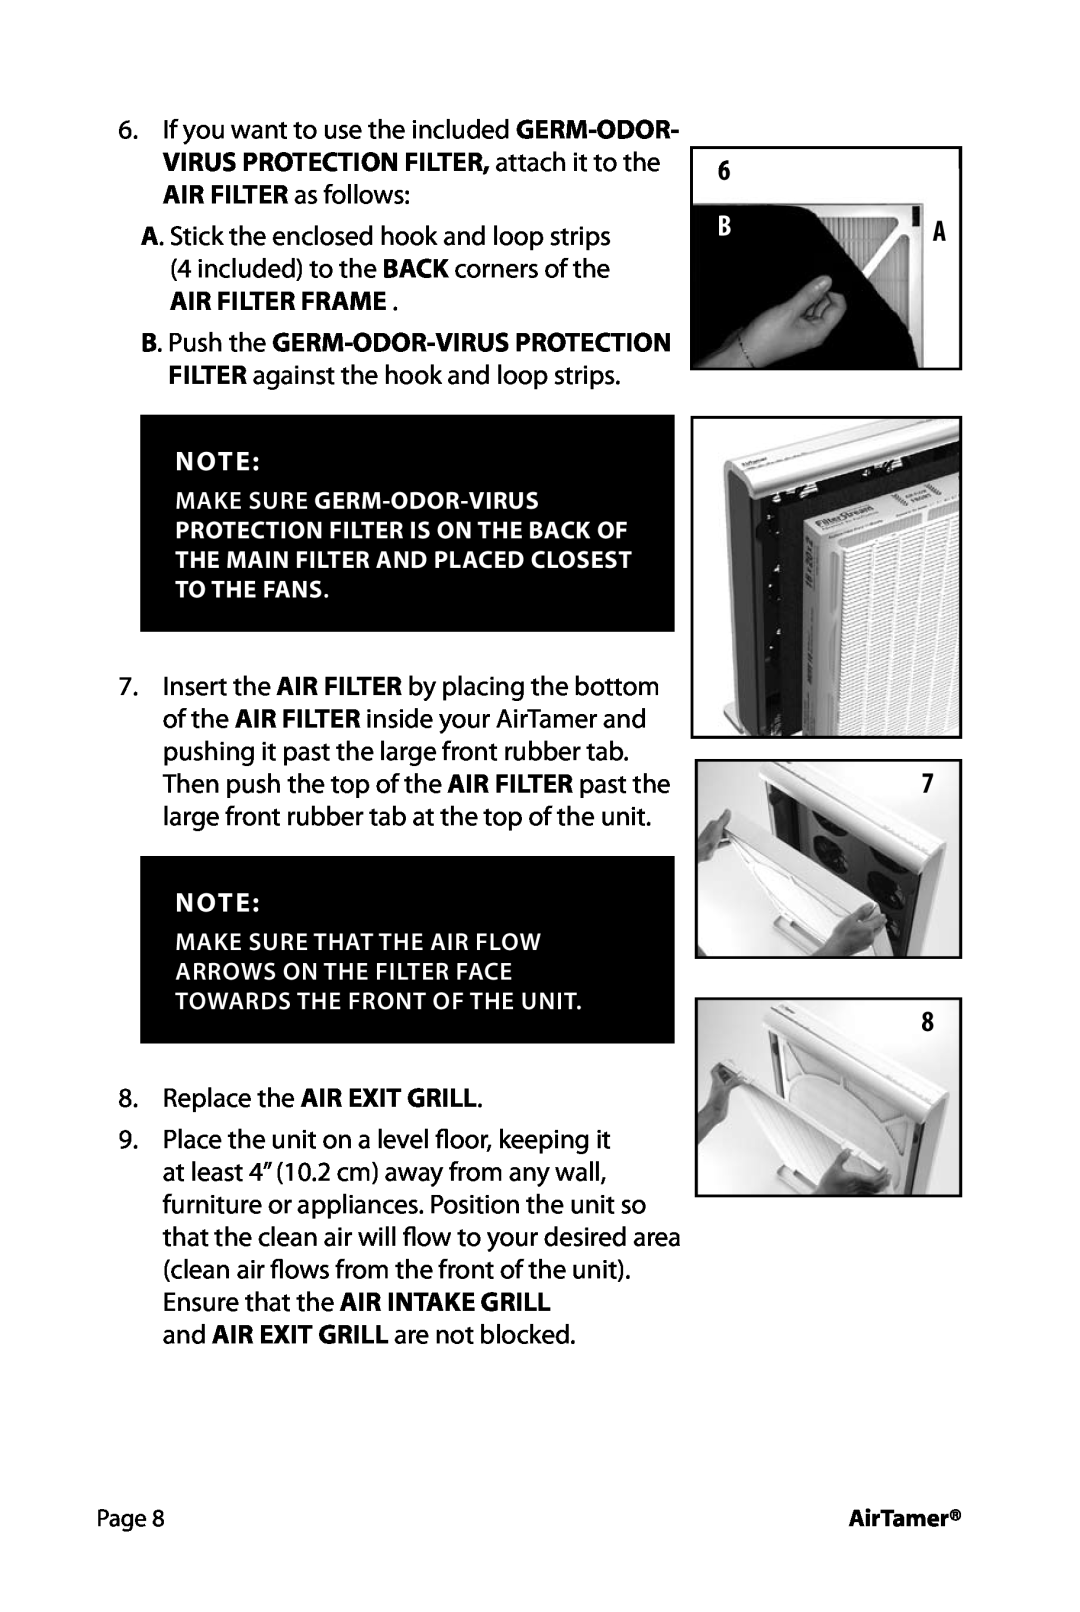 FilterStream HW_A710 instruction manual Air Filter Frame, Replace the AIR EXIT GRILL 